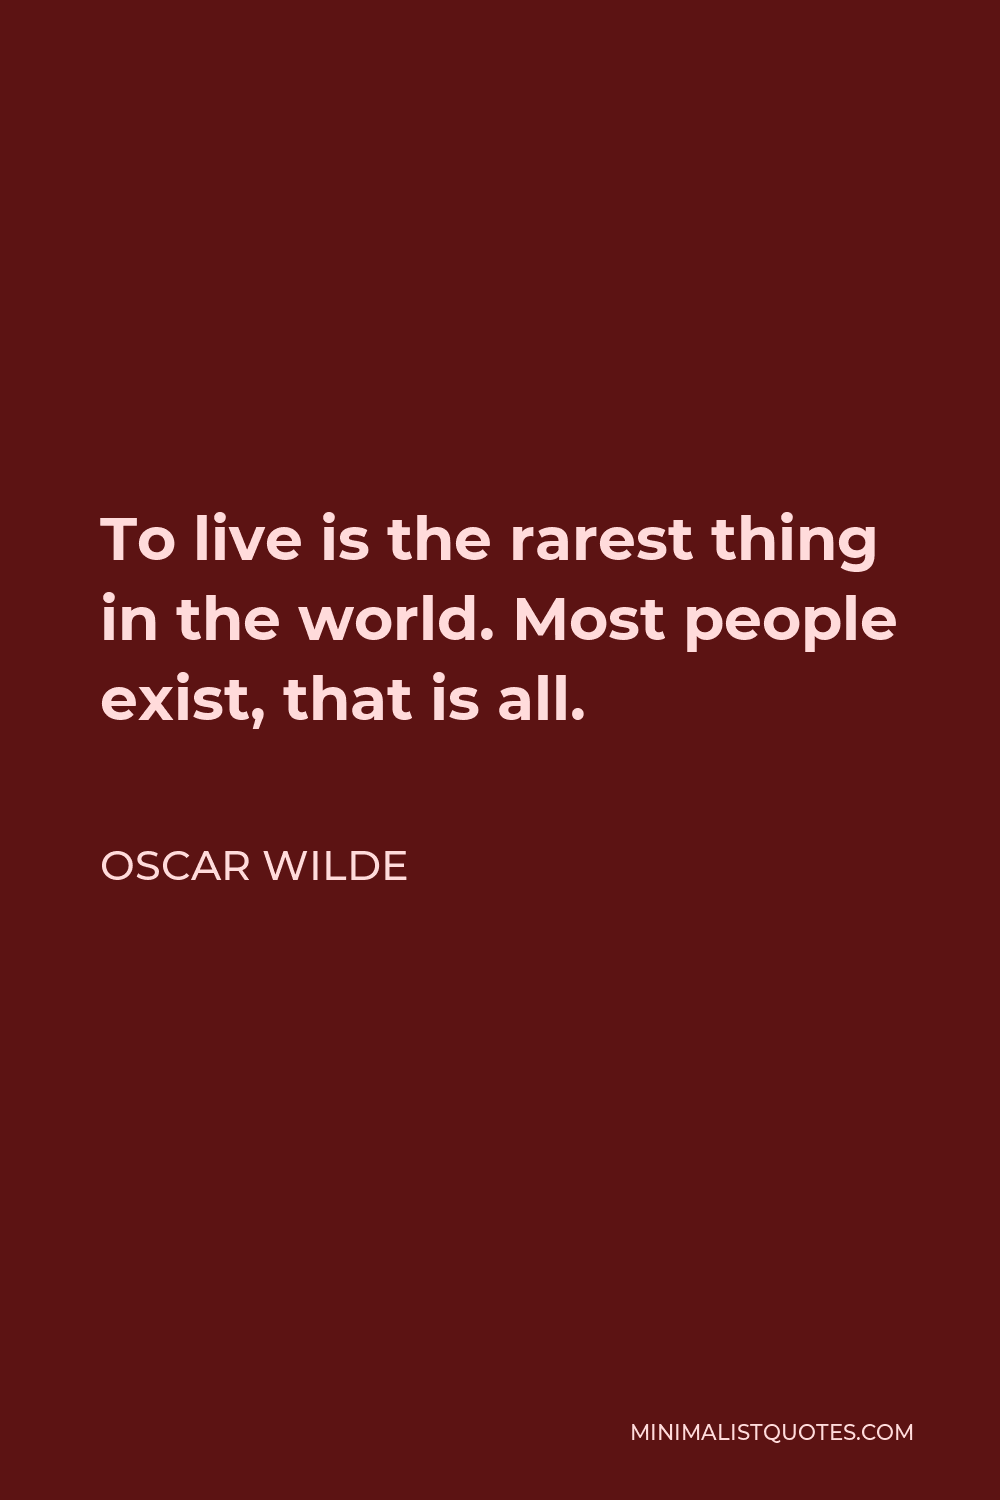 Oscar Wilde Quote - To live is the rarest thing in the world. Most people exist, that is all.